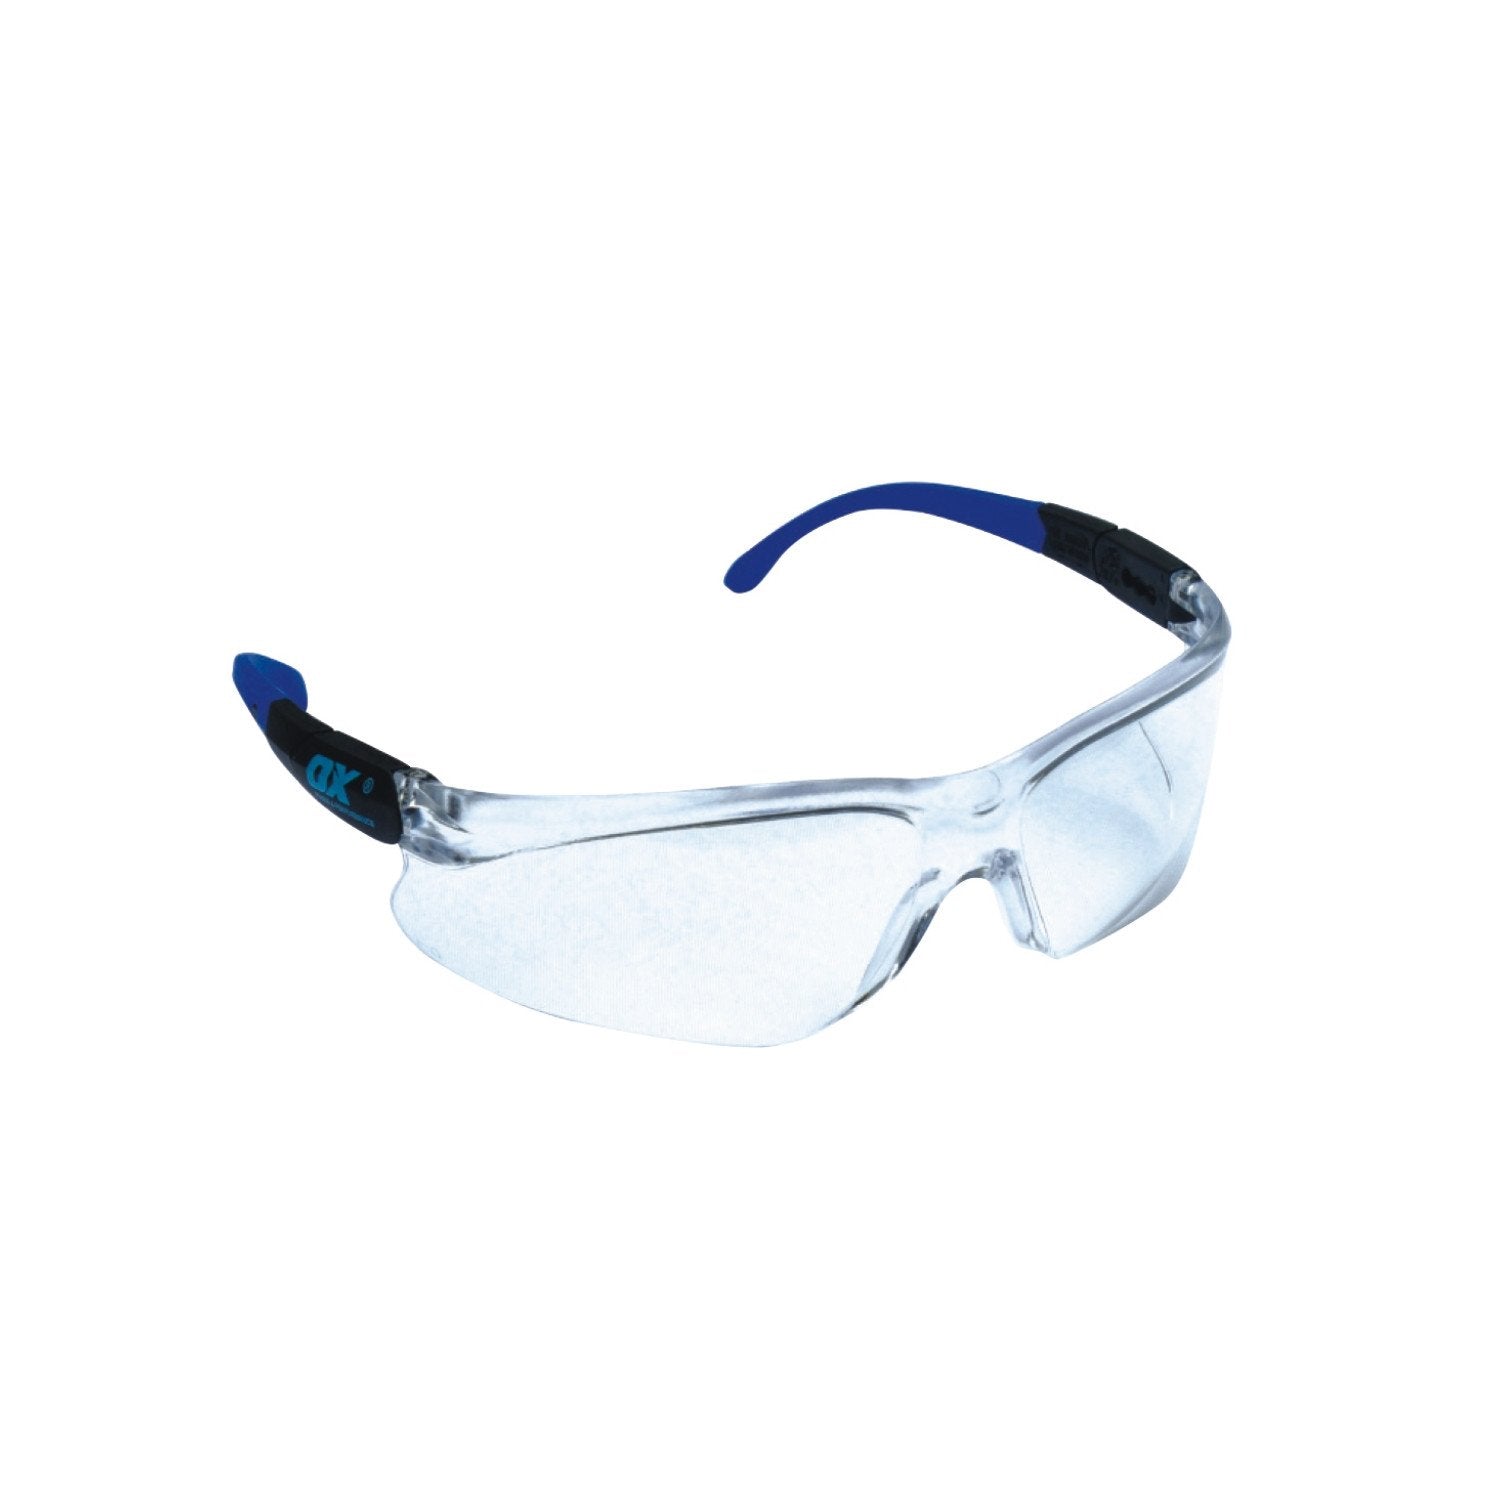 OX Safety Specs - Clear Lens